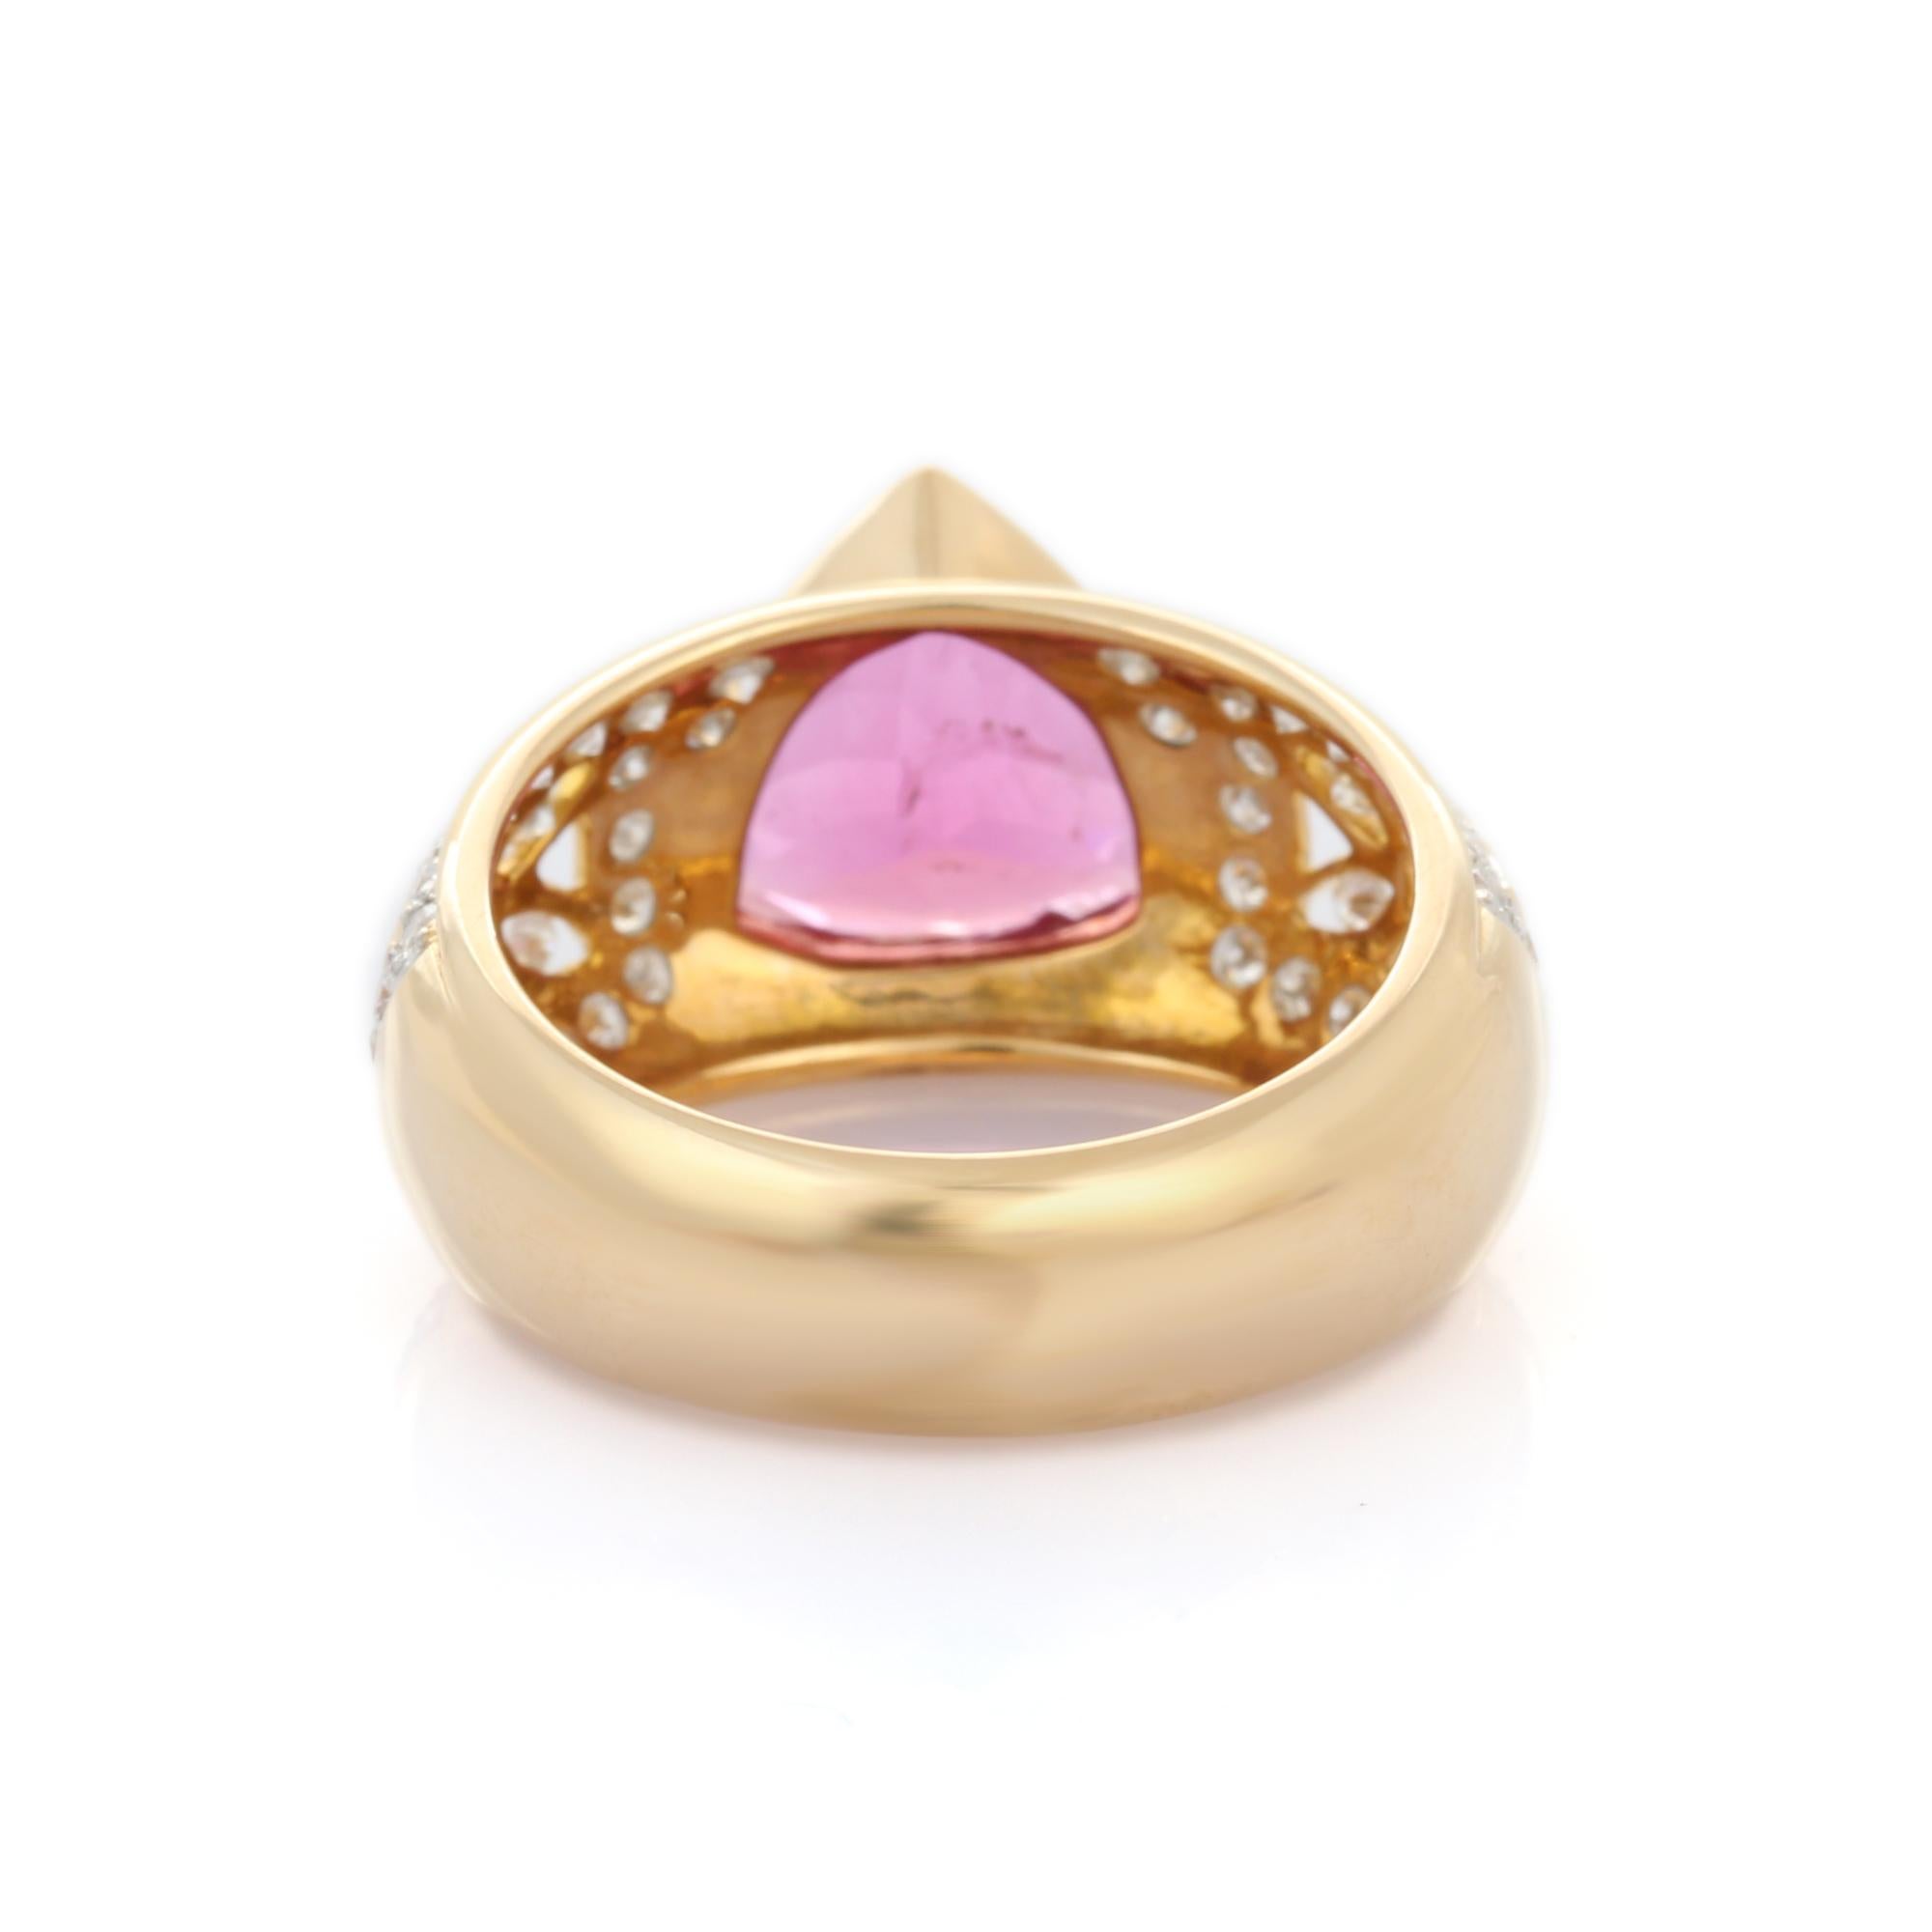 For Sale:  2.81 Carat Trillion cut Ruby Diamond Bridal Ring in 18K Yellow Gold  5